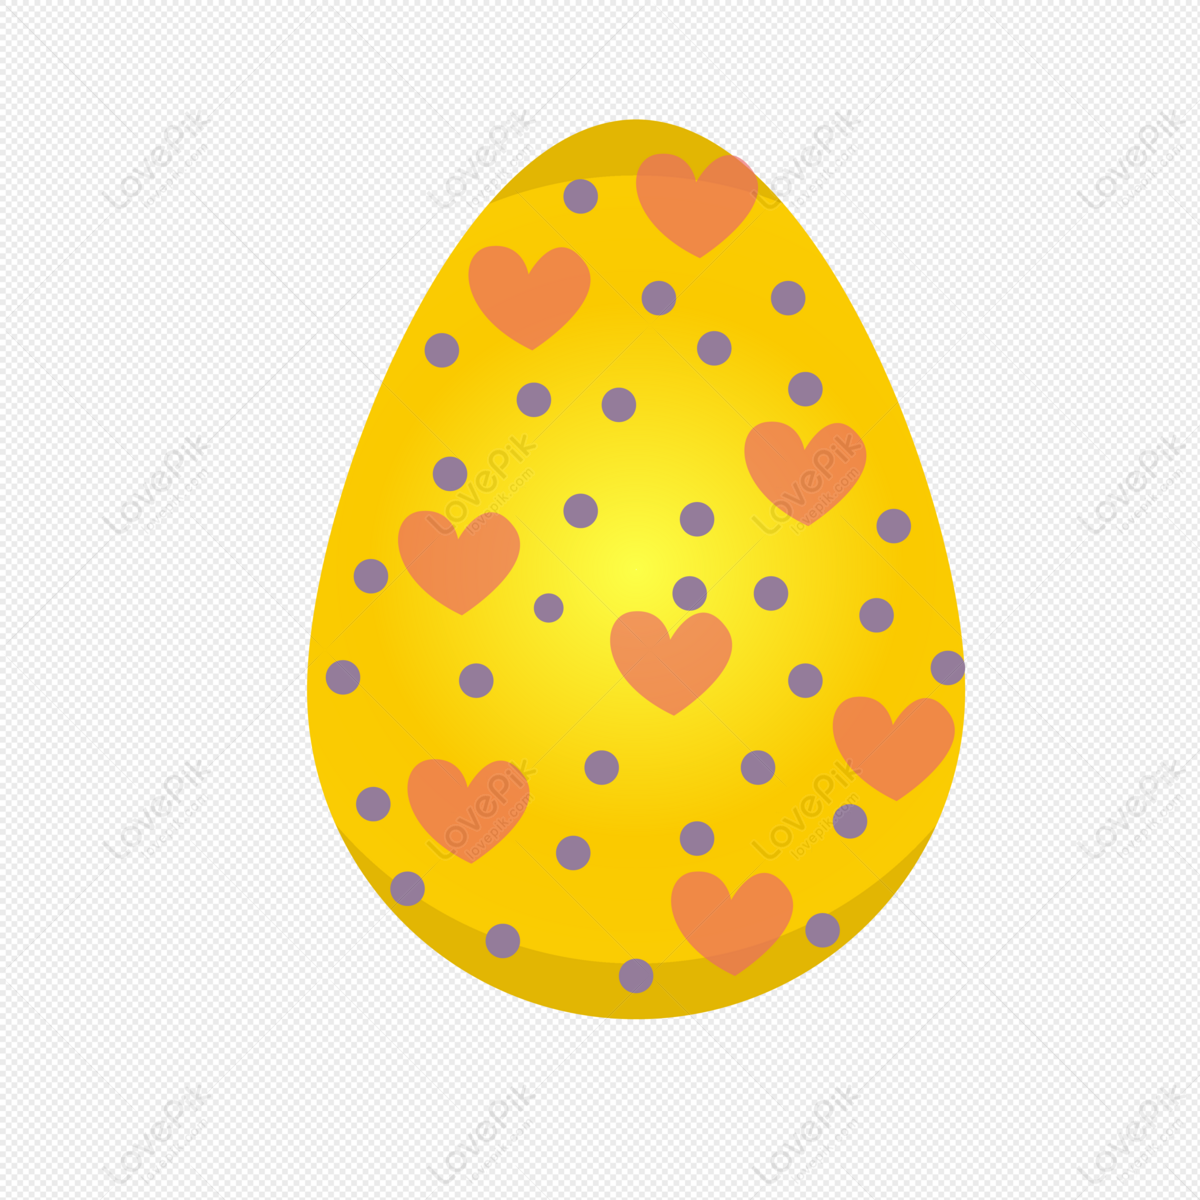 Three Golden Eggs PNG Image And Clipart Image For Free Download - Lovepik